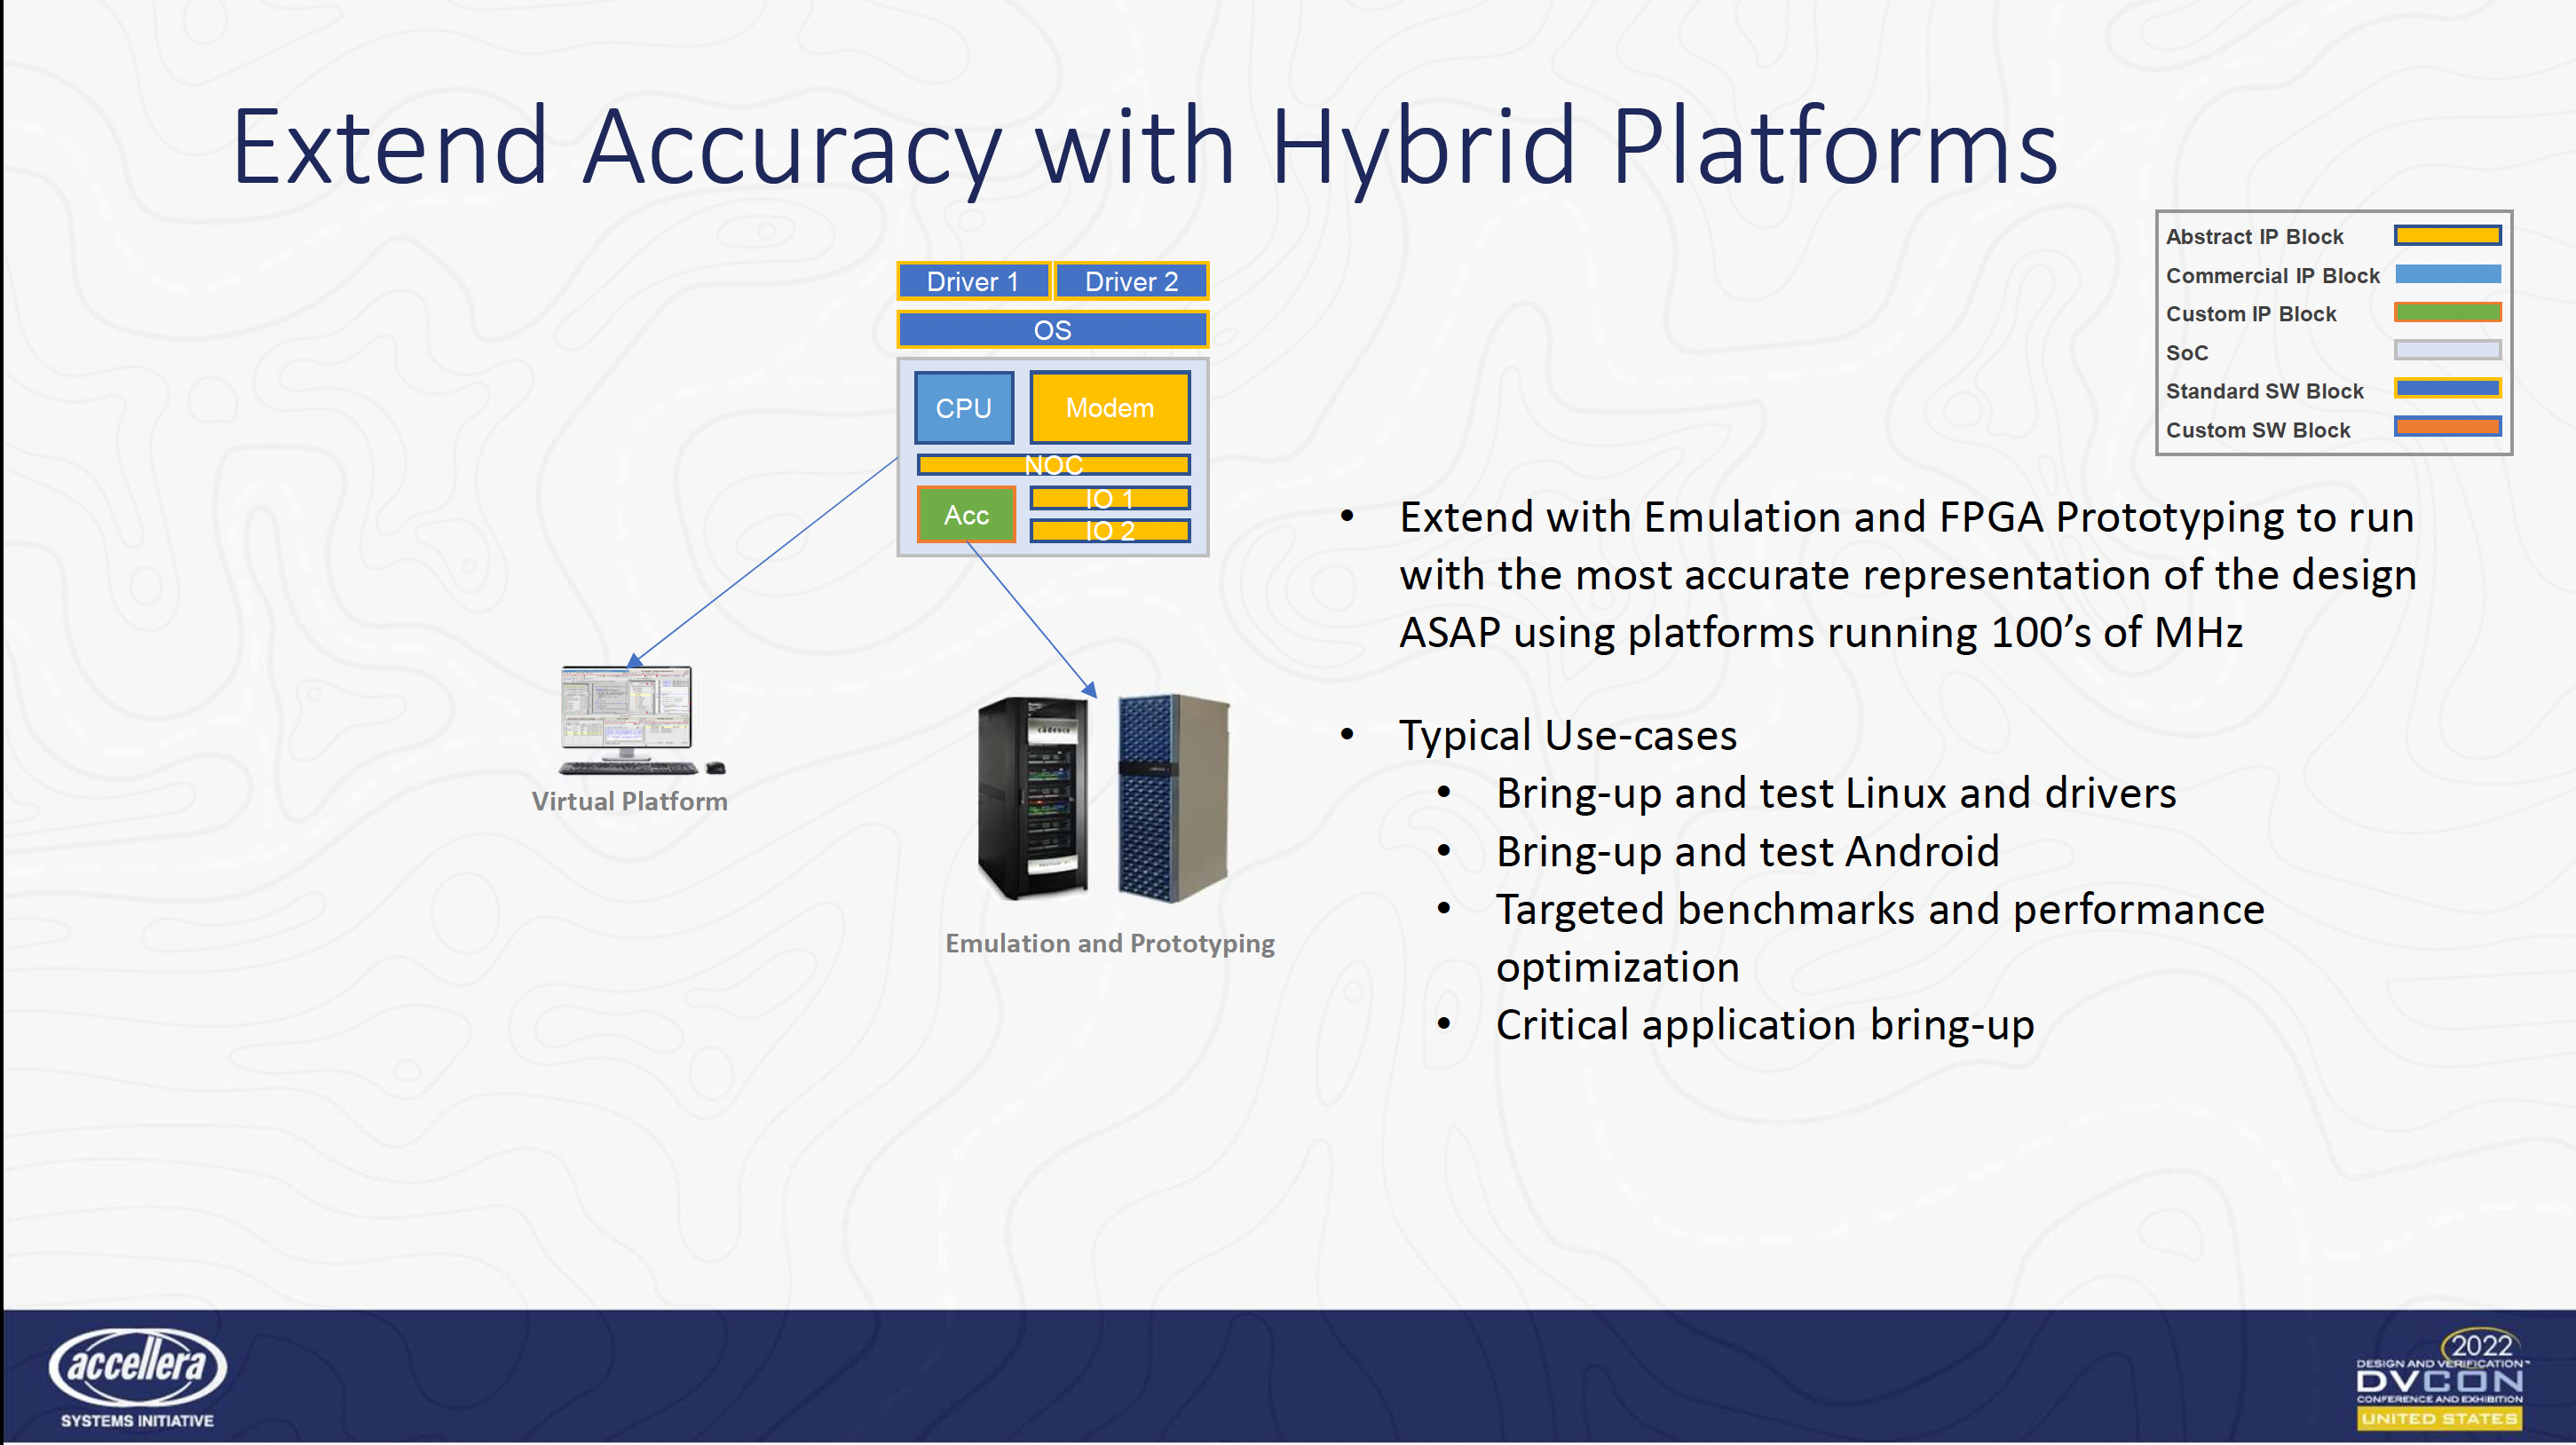 Extend Accuracy with Hybrid Platforms